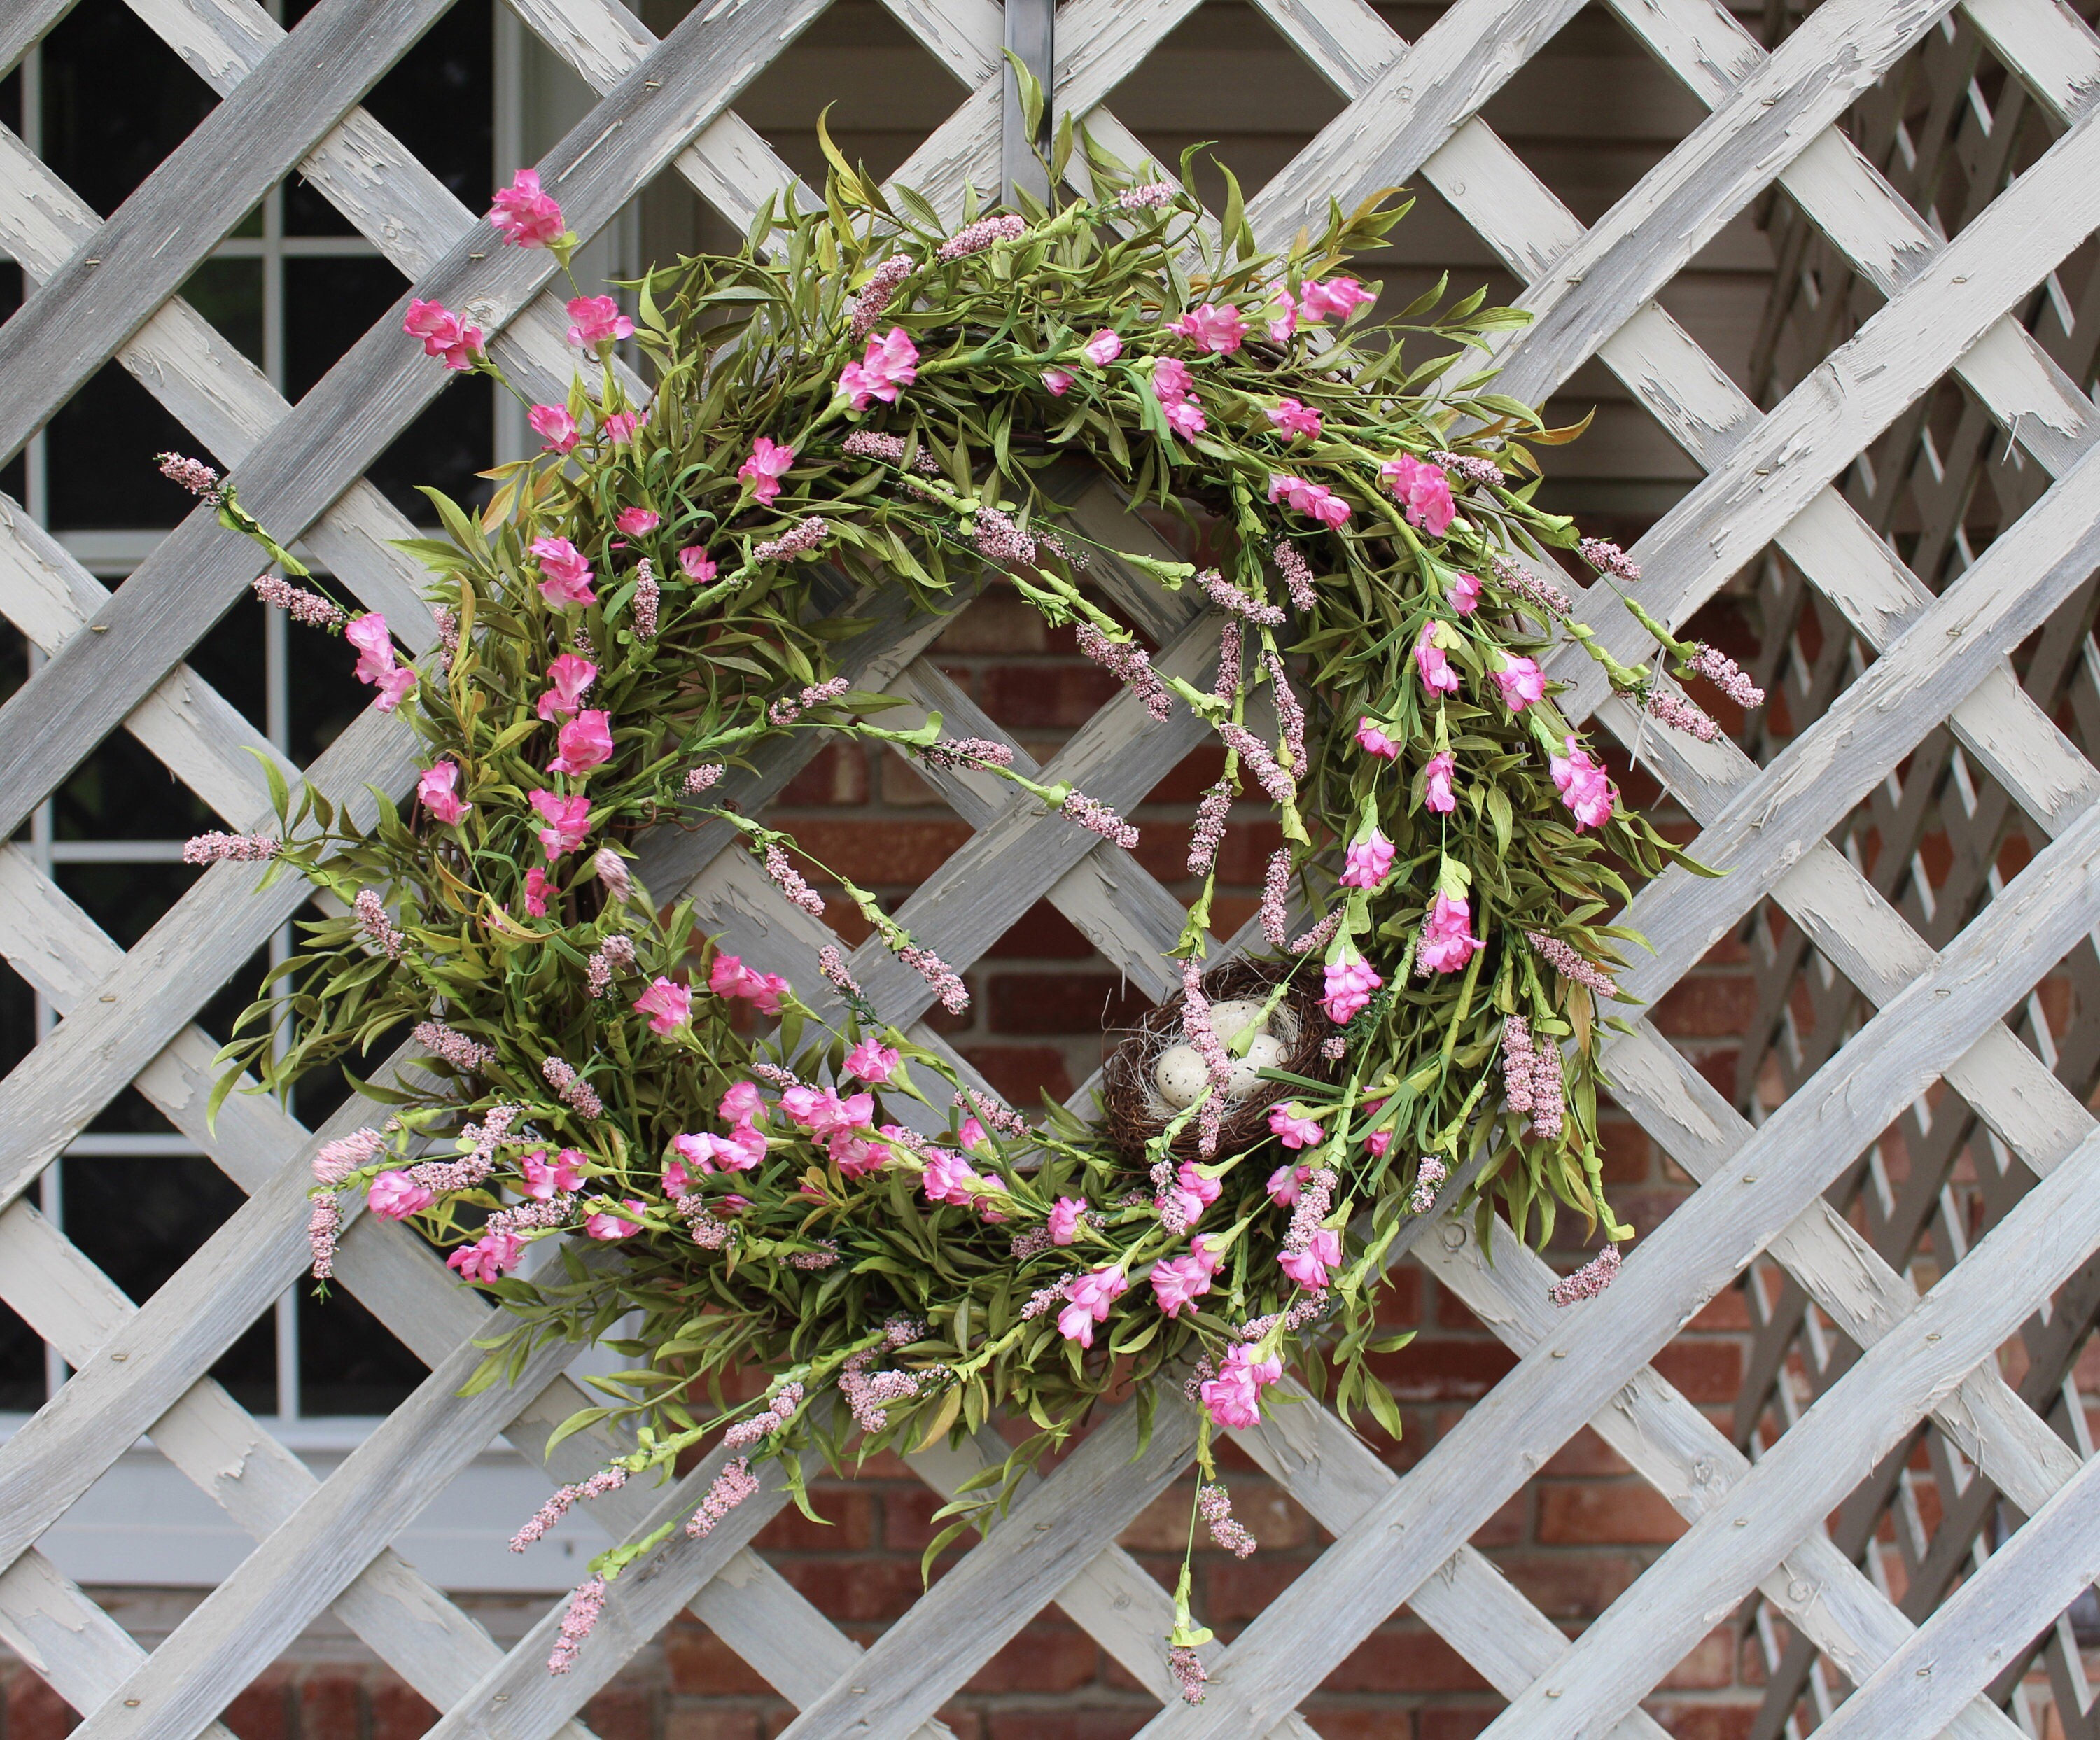 15 Colorful Handmade Summer Wreath Ideas To Refresh Your Front Door